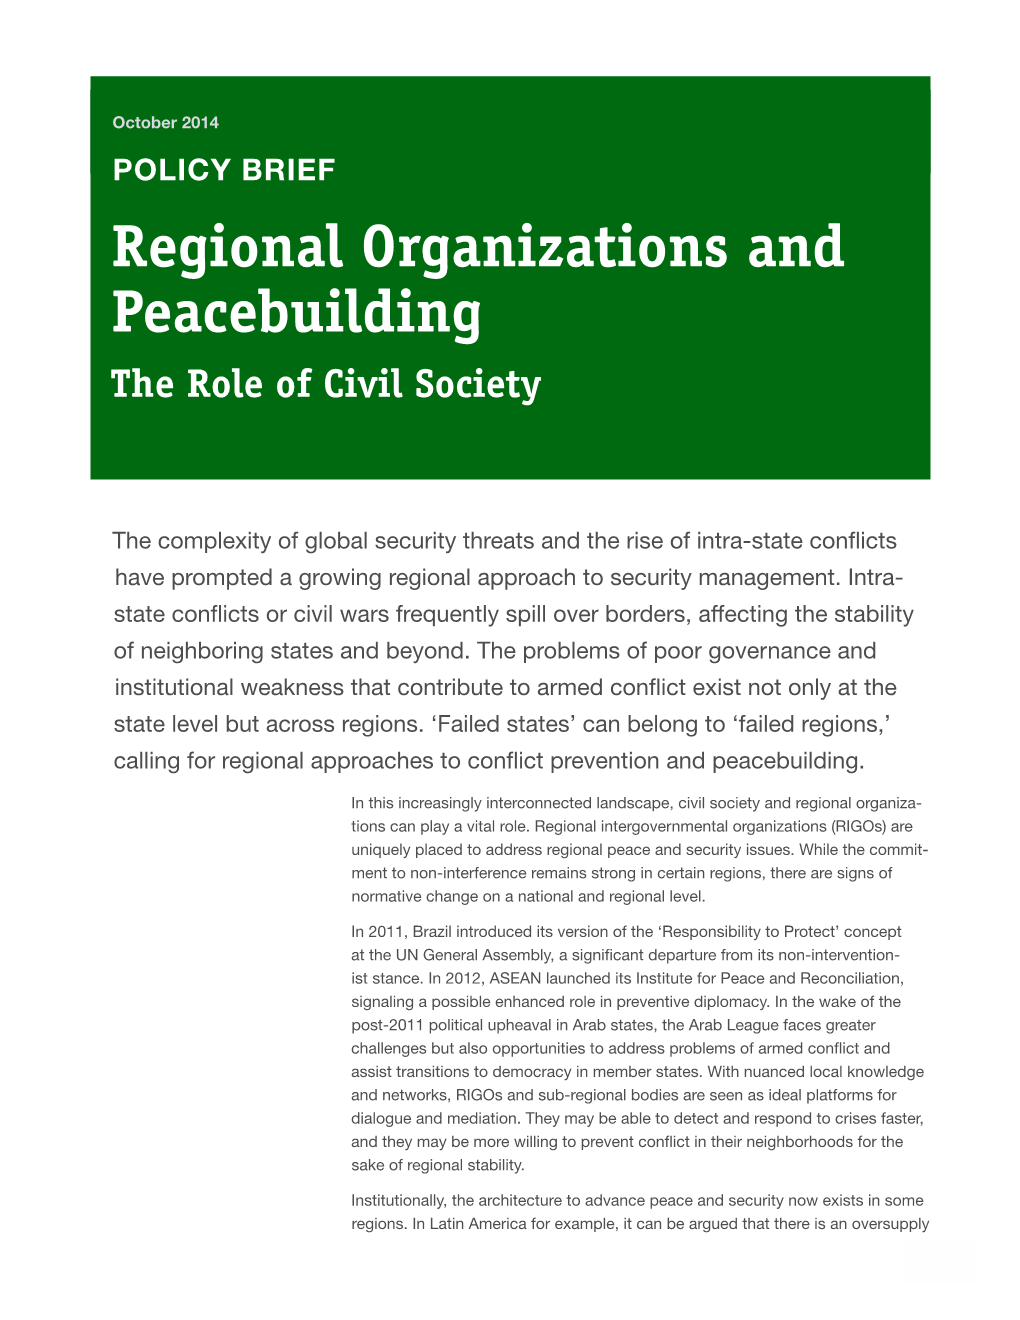 Regional Organizations and Peacebuilding: The